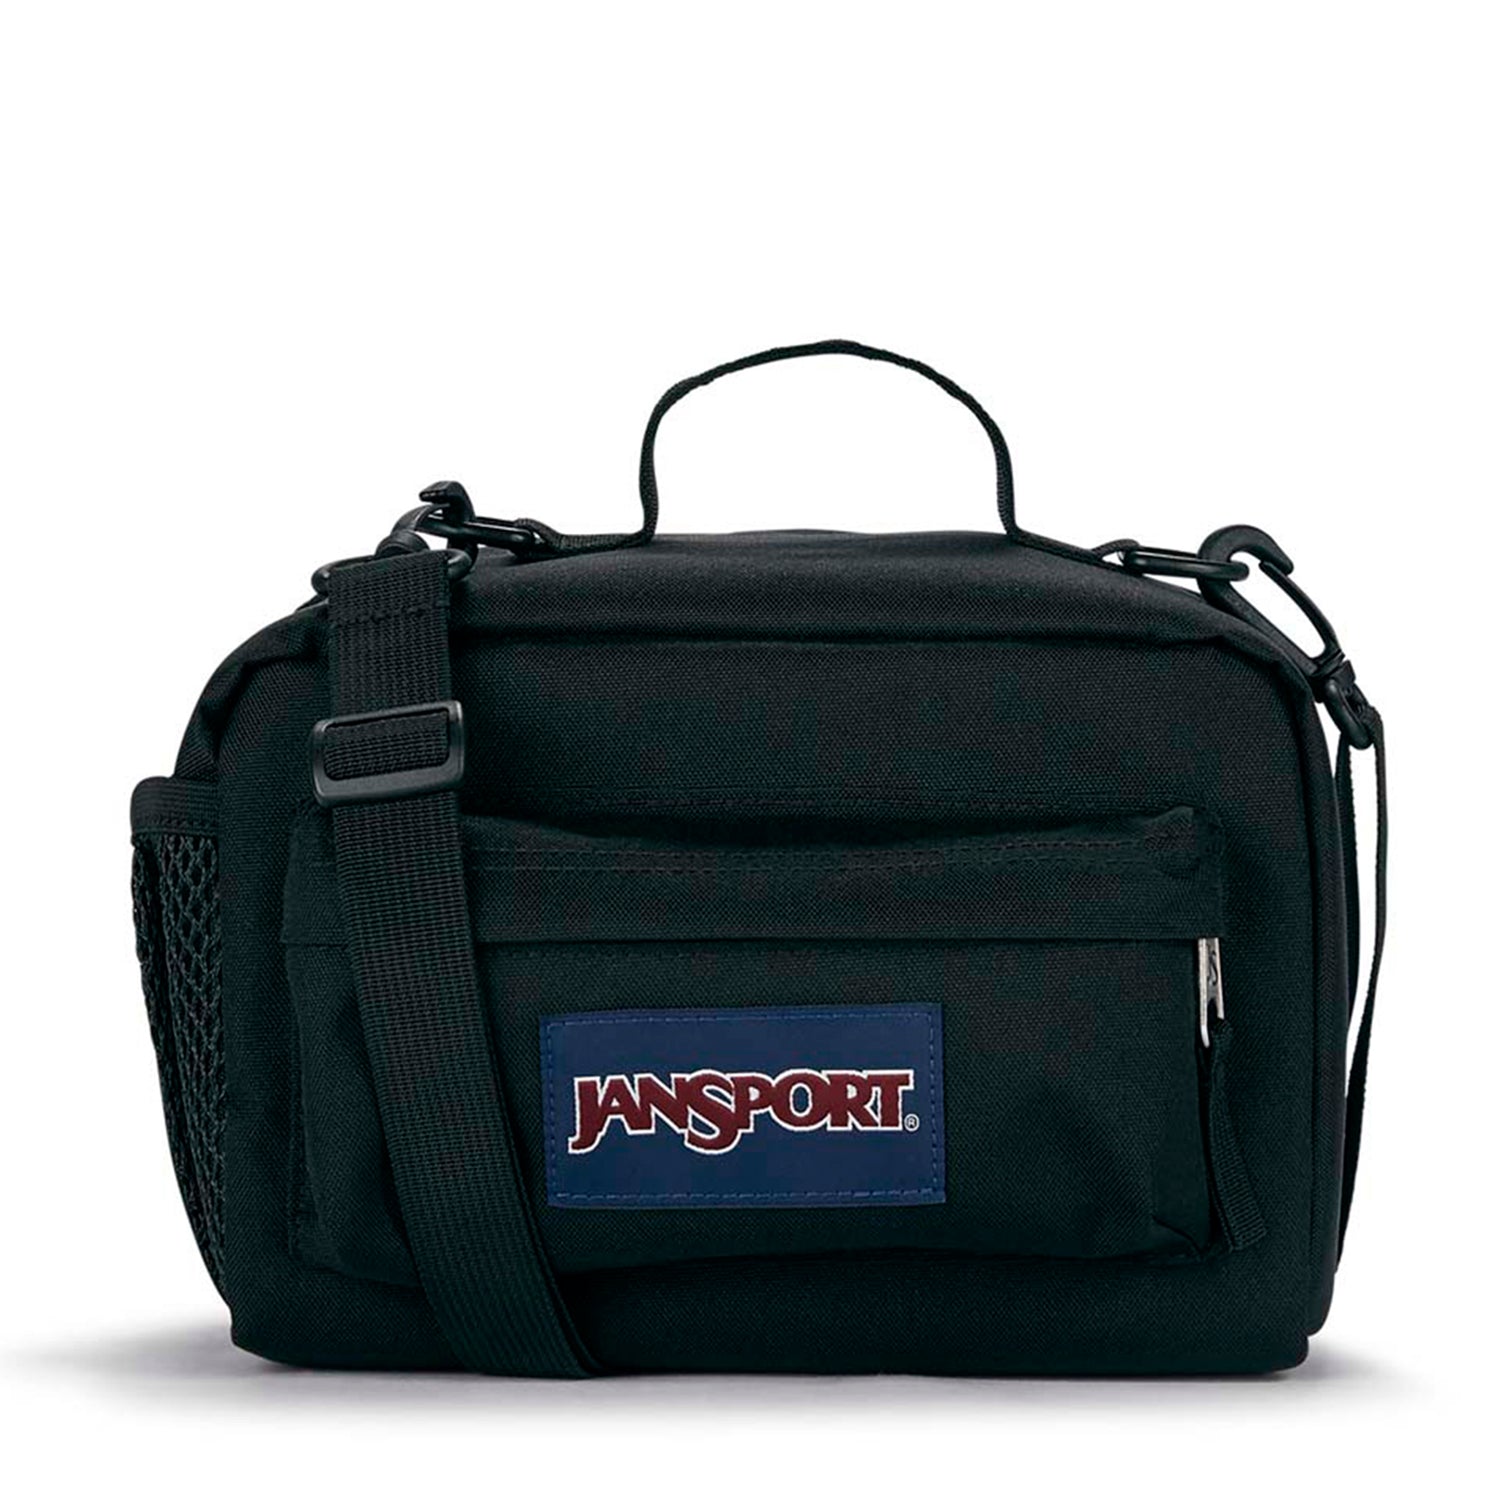 The Carryout Lunch Box - Bentley